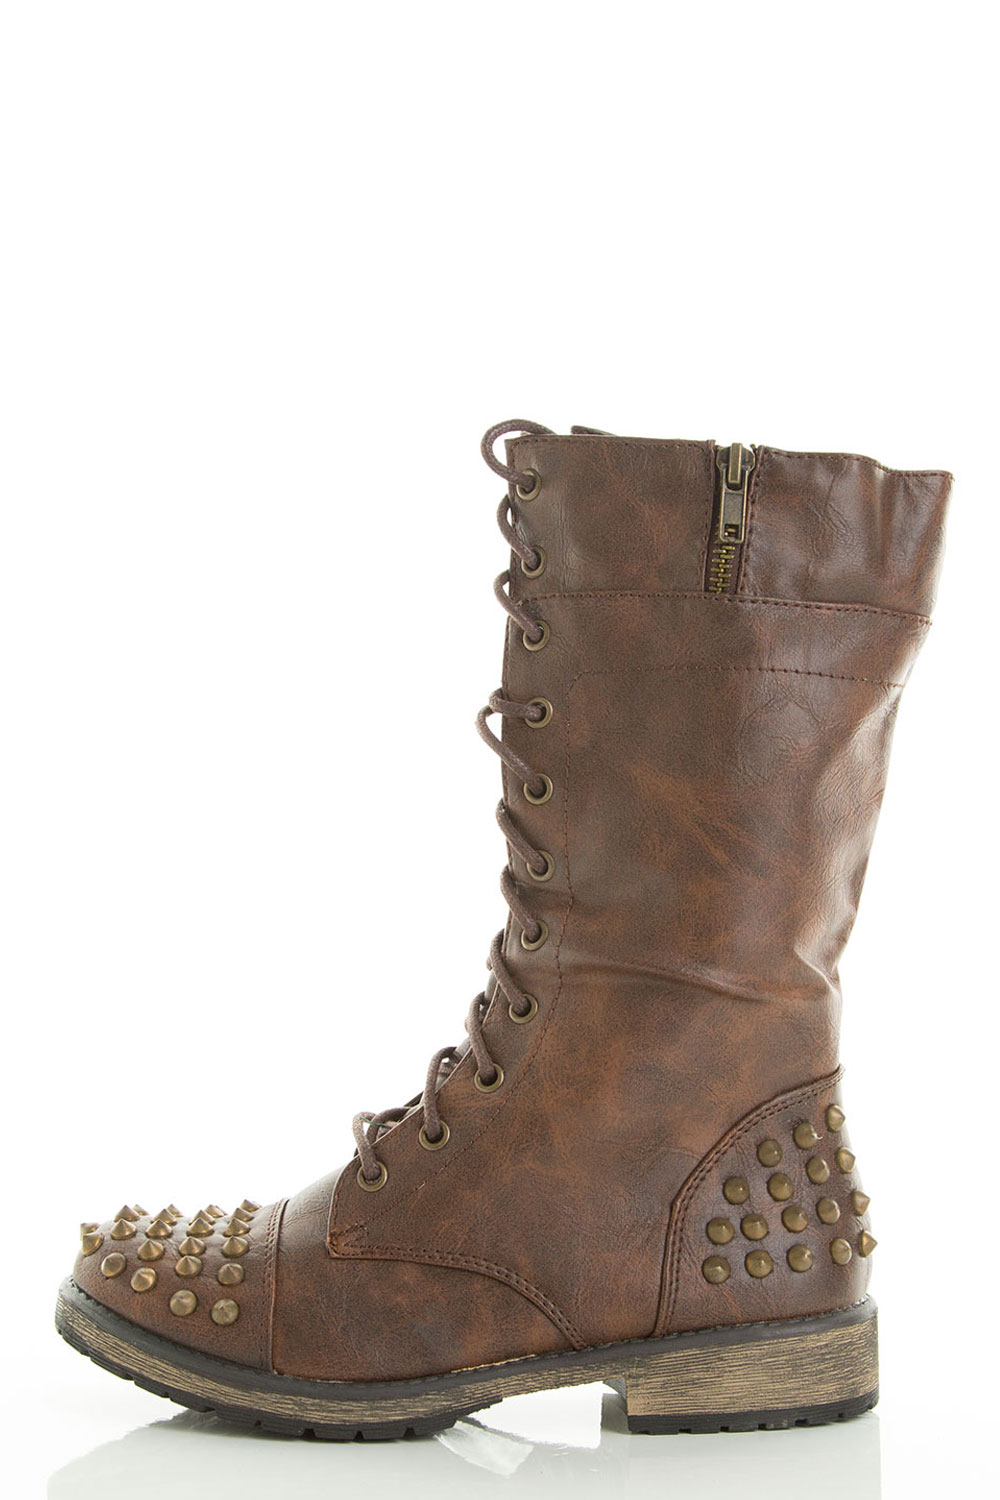 Spike Stud Lace Up Military Low Flat Heel Combat Ankle Boots